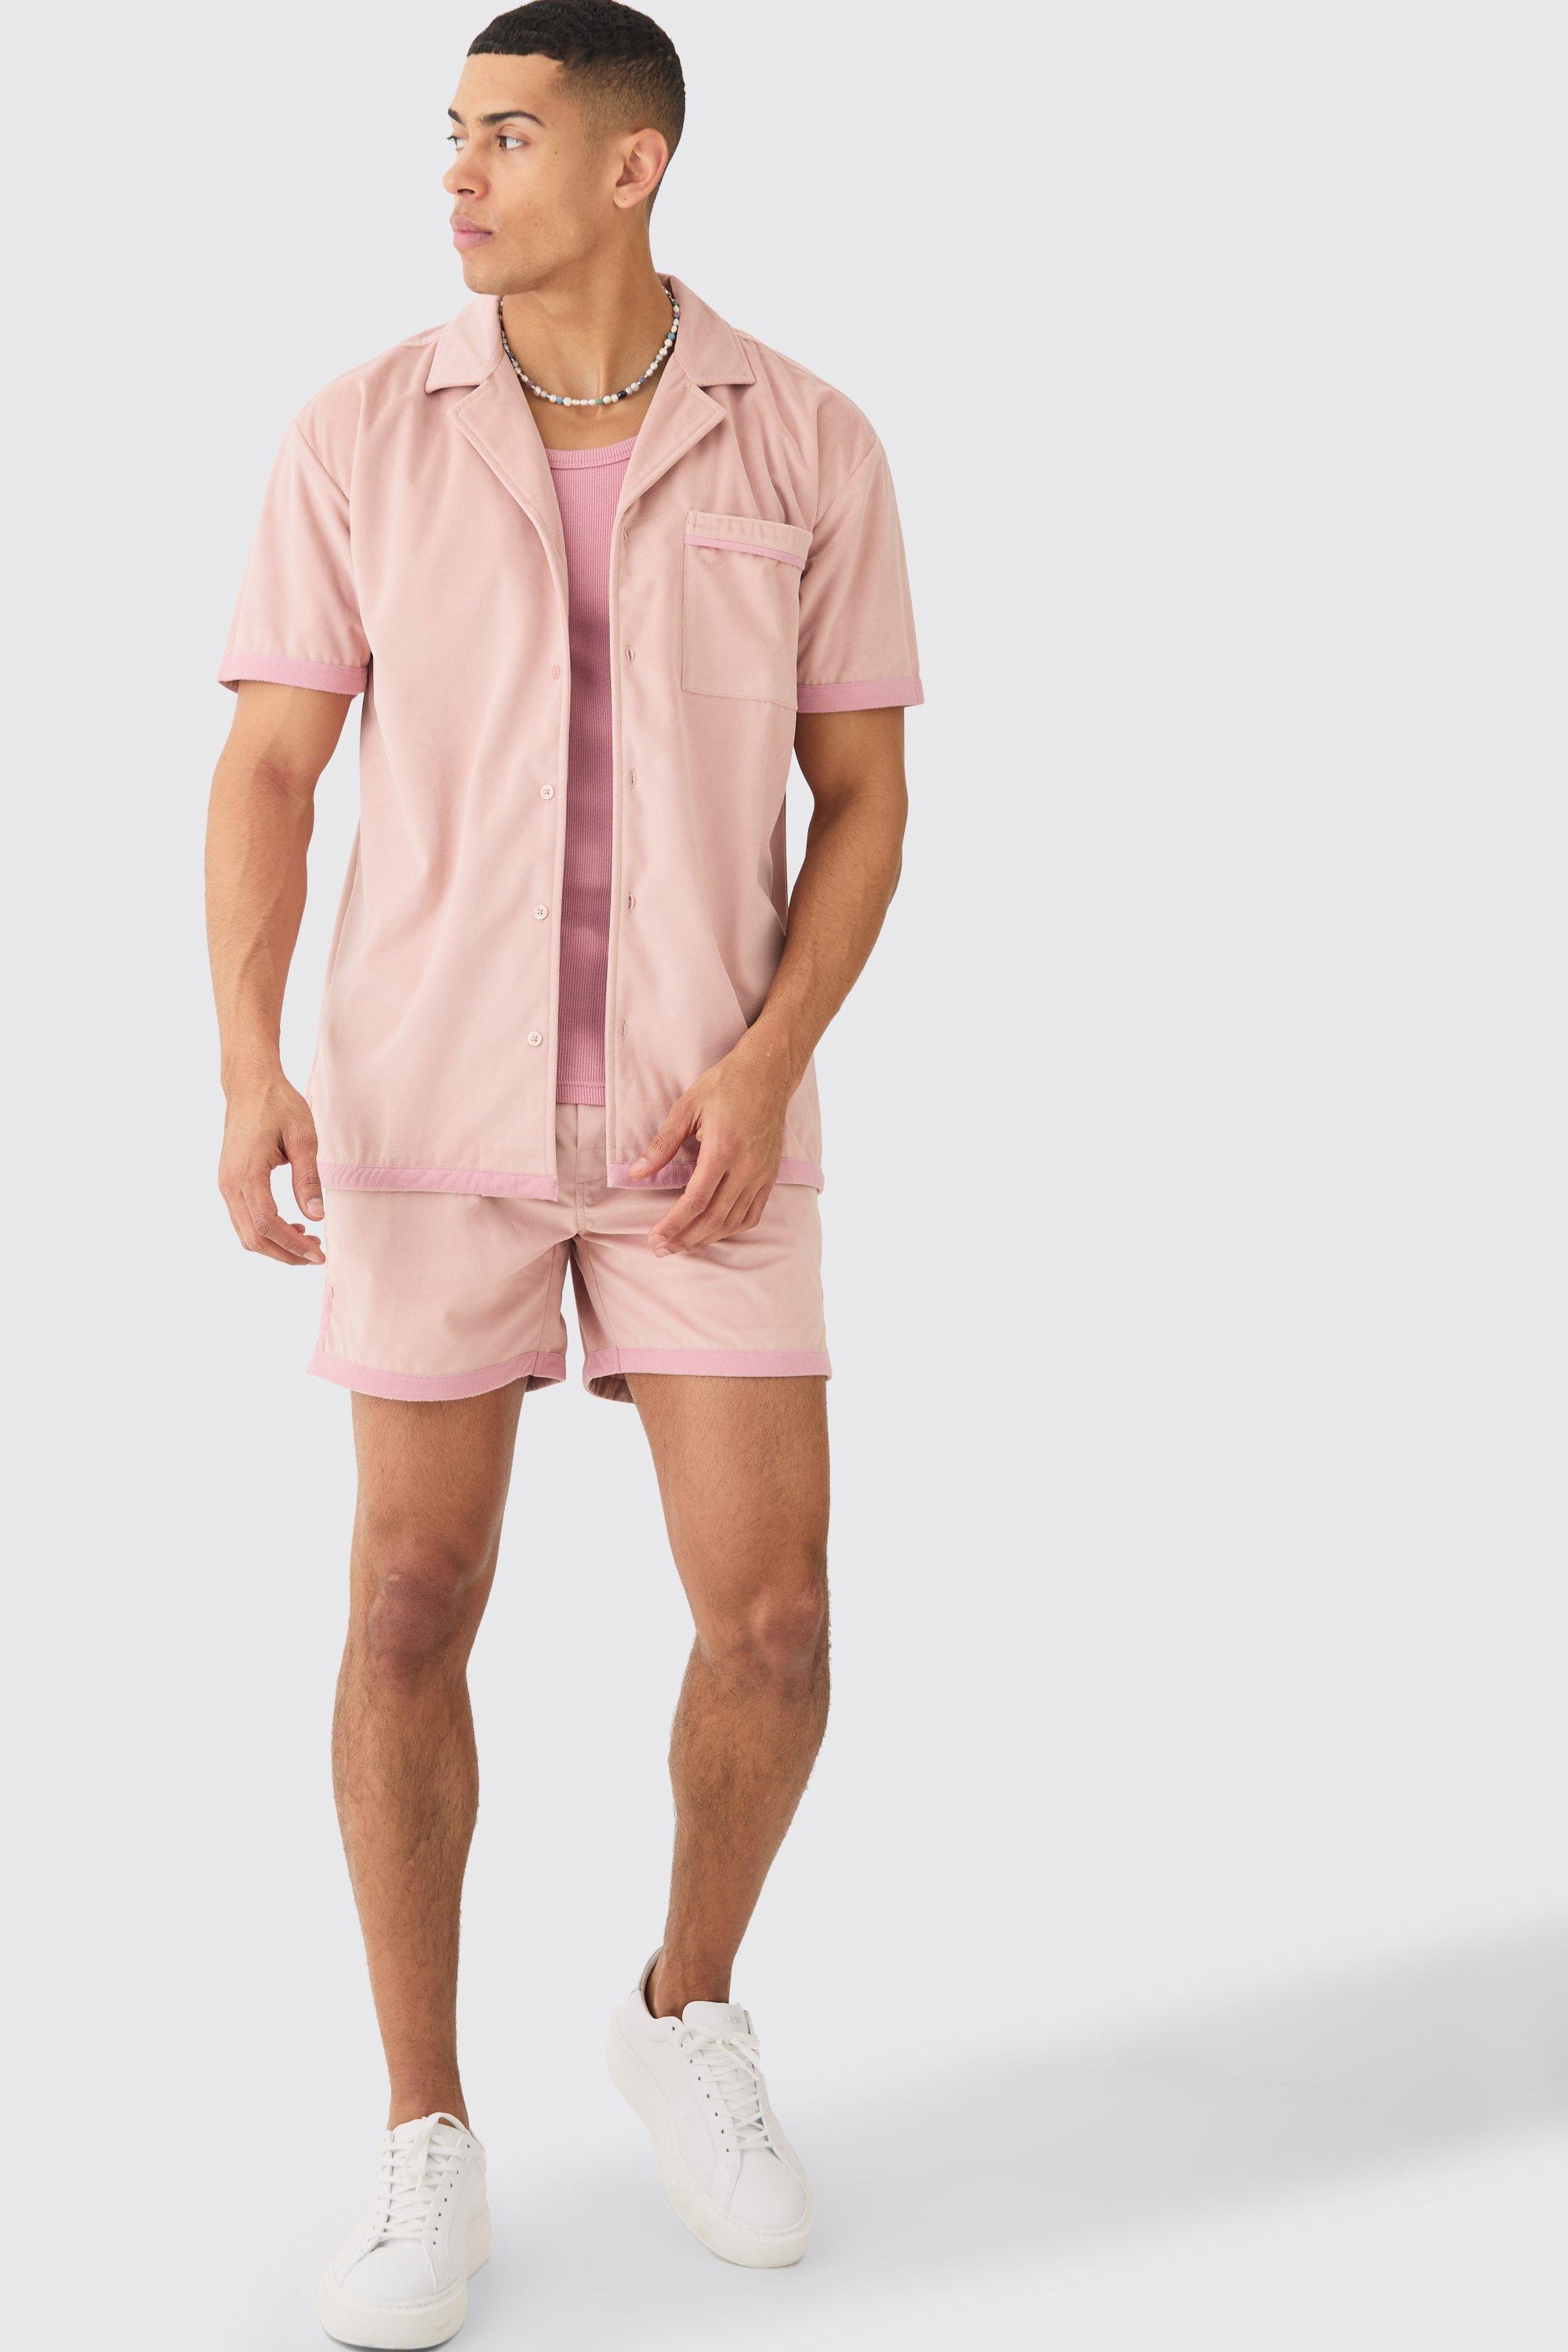 Image of Suede Oversized Shirt And Short, Pink